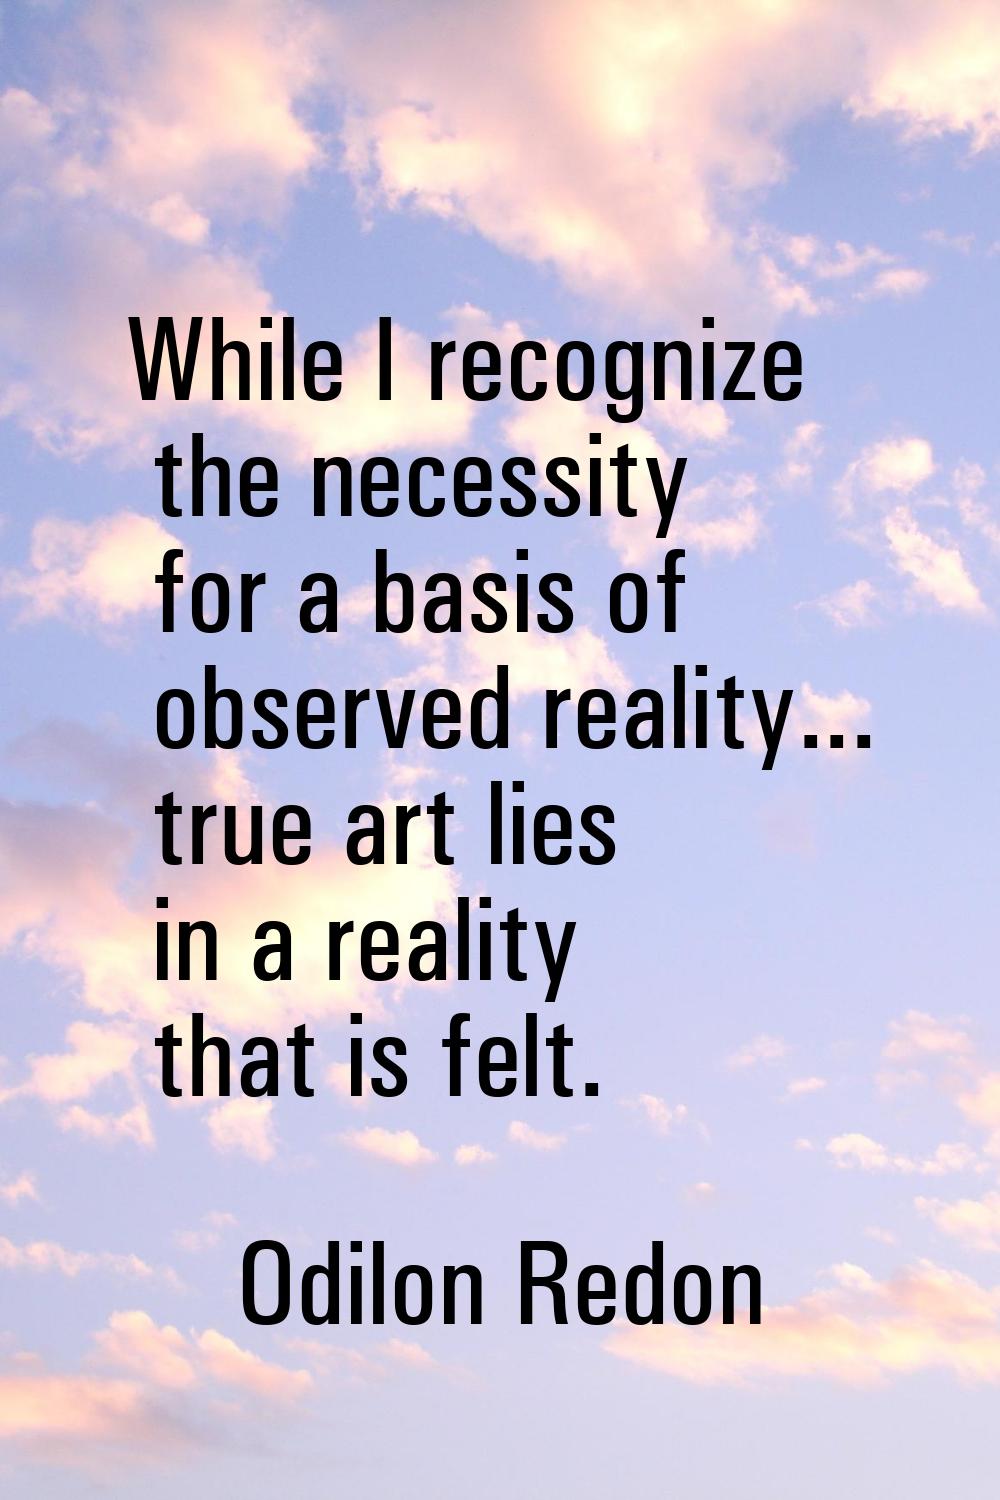 While I recognize the necessity for a basis of observed reality... true art lies in a reality that 